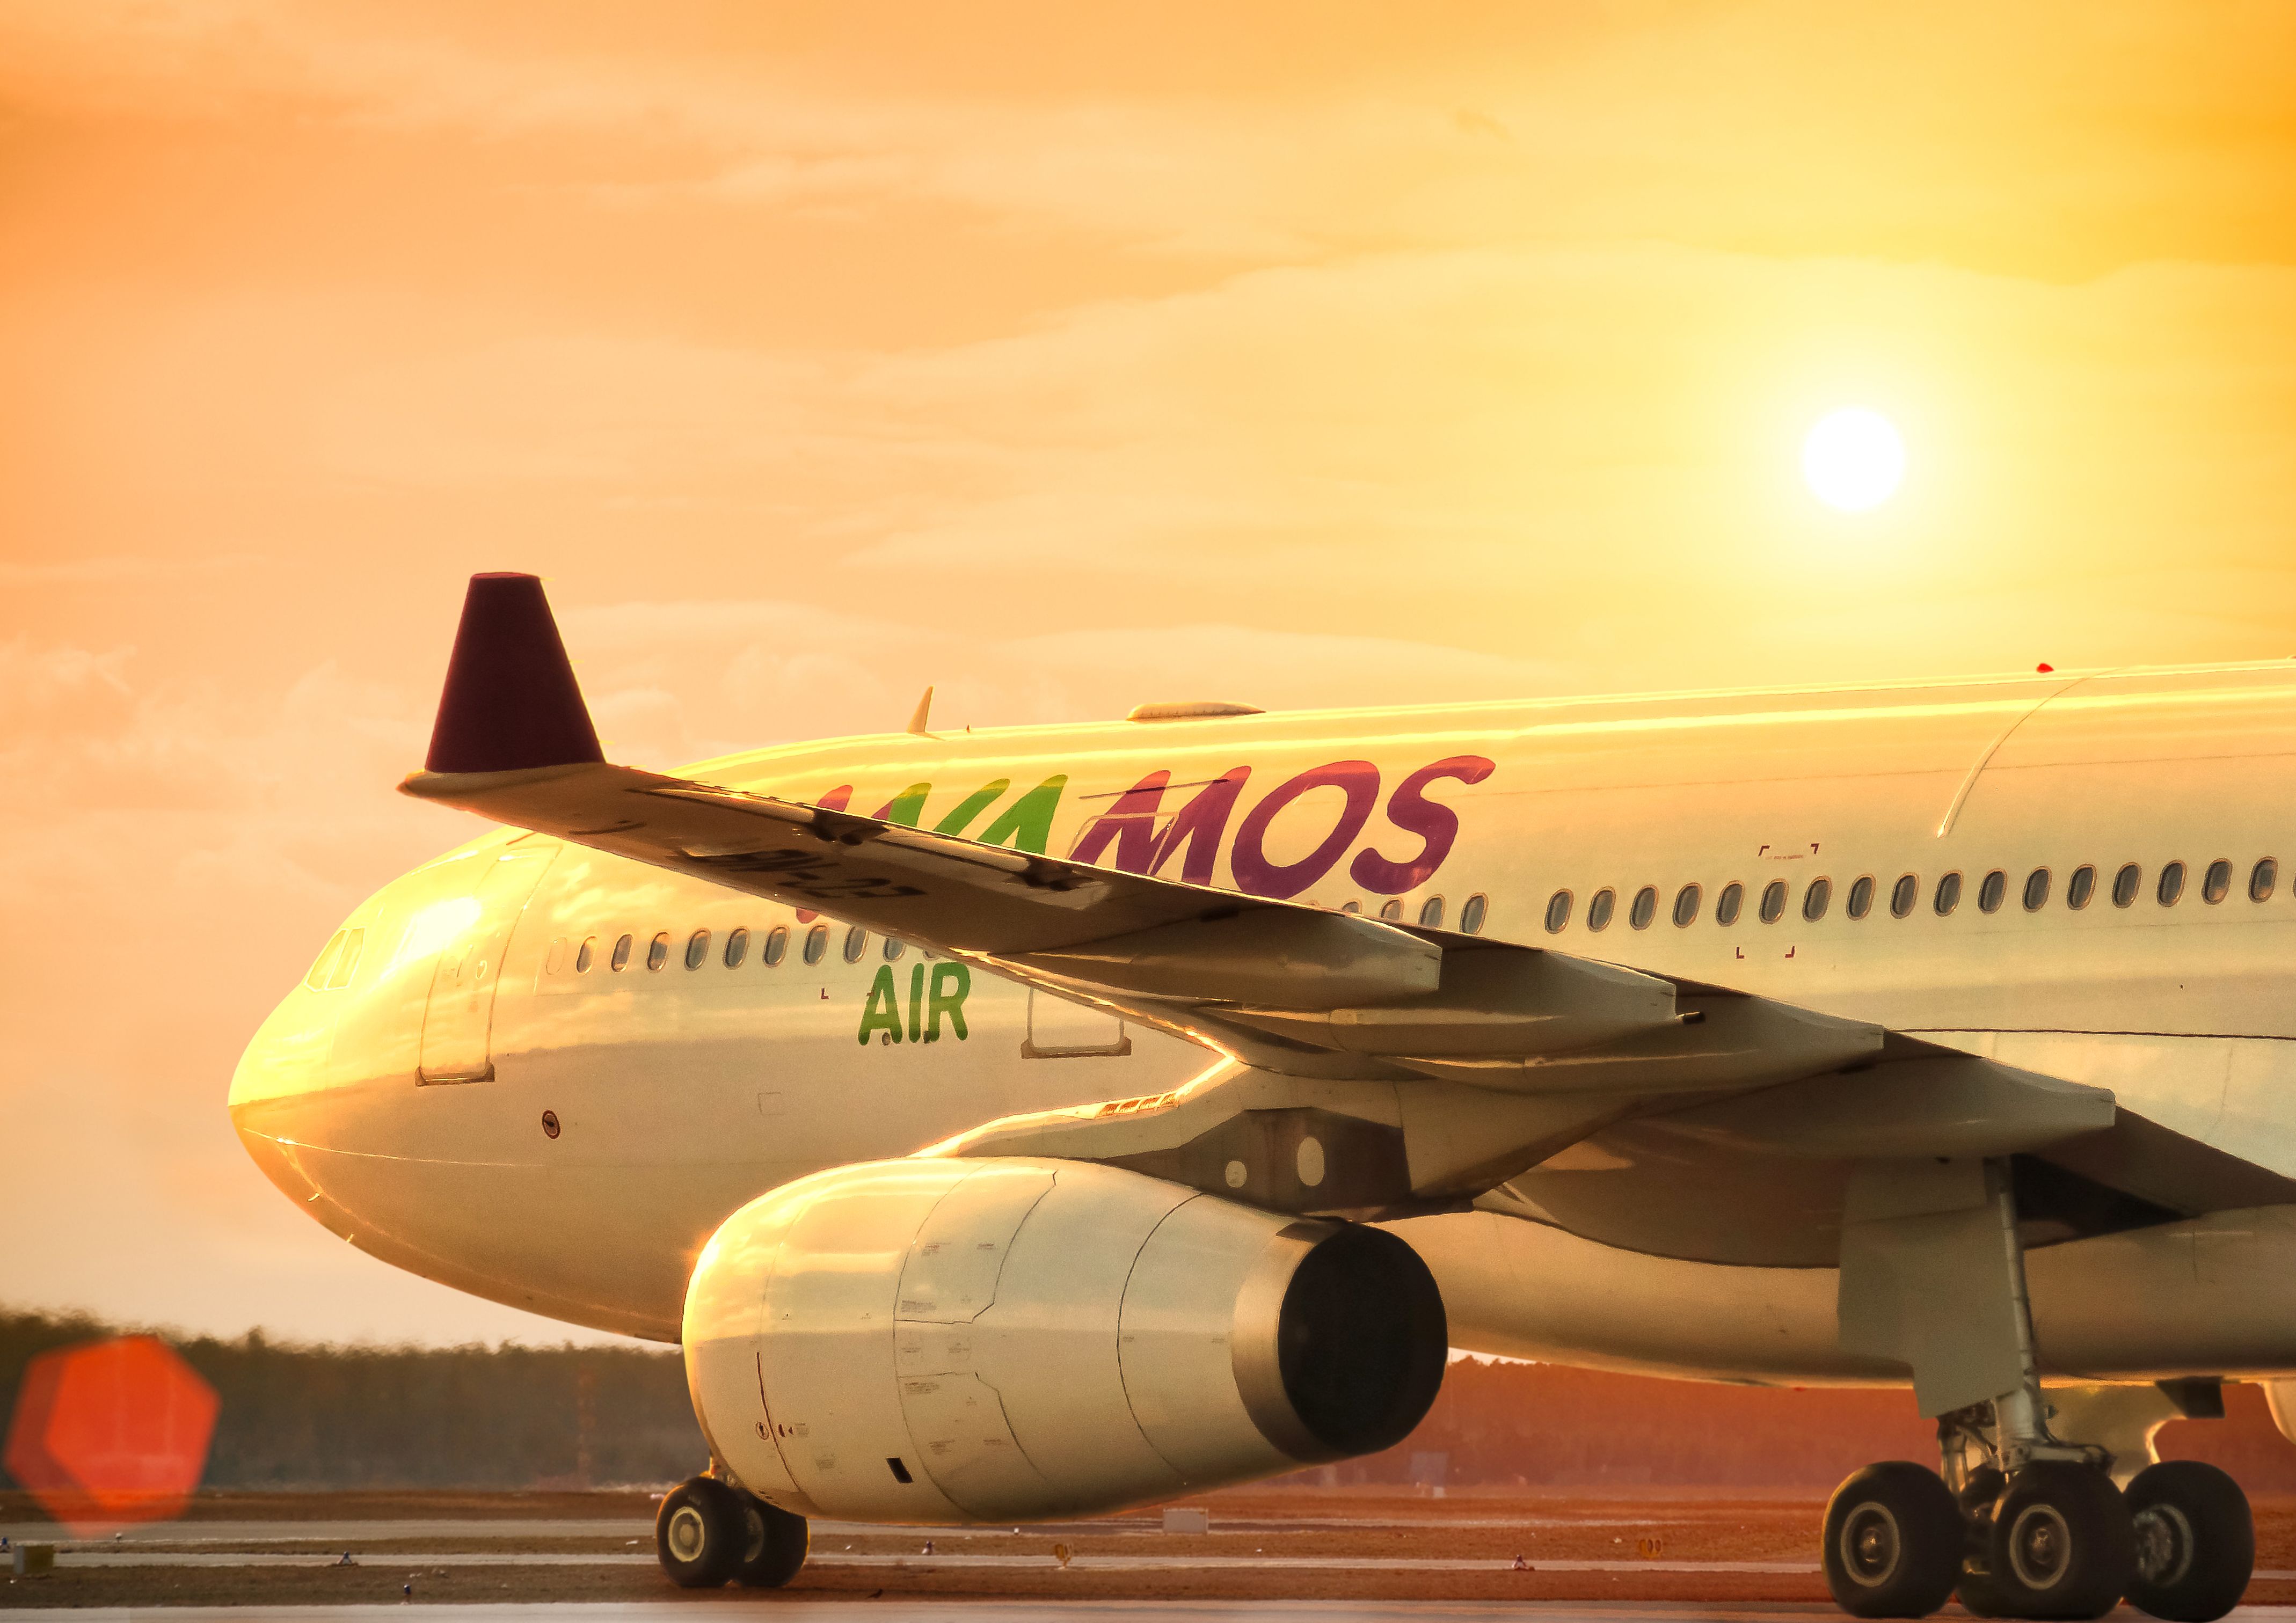 A Wamos Air A330 is on lease to Air New Zealand